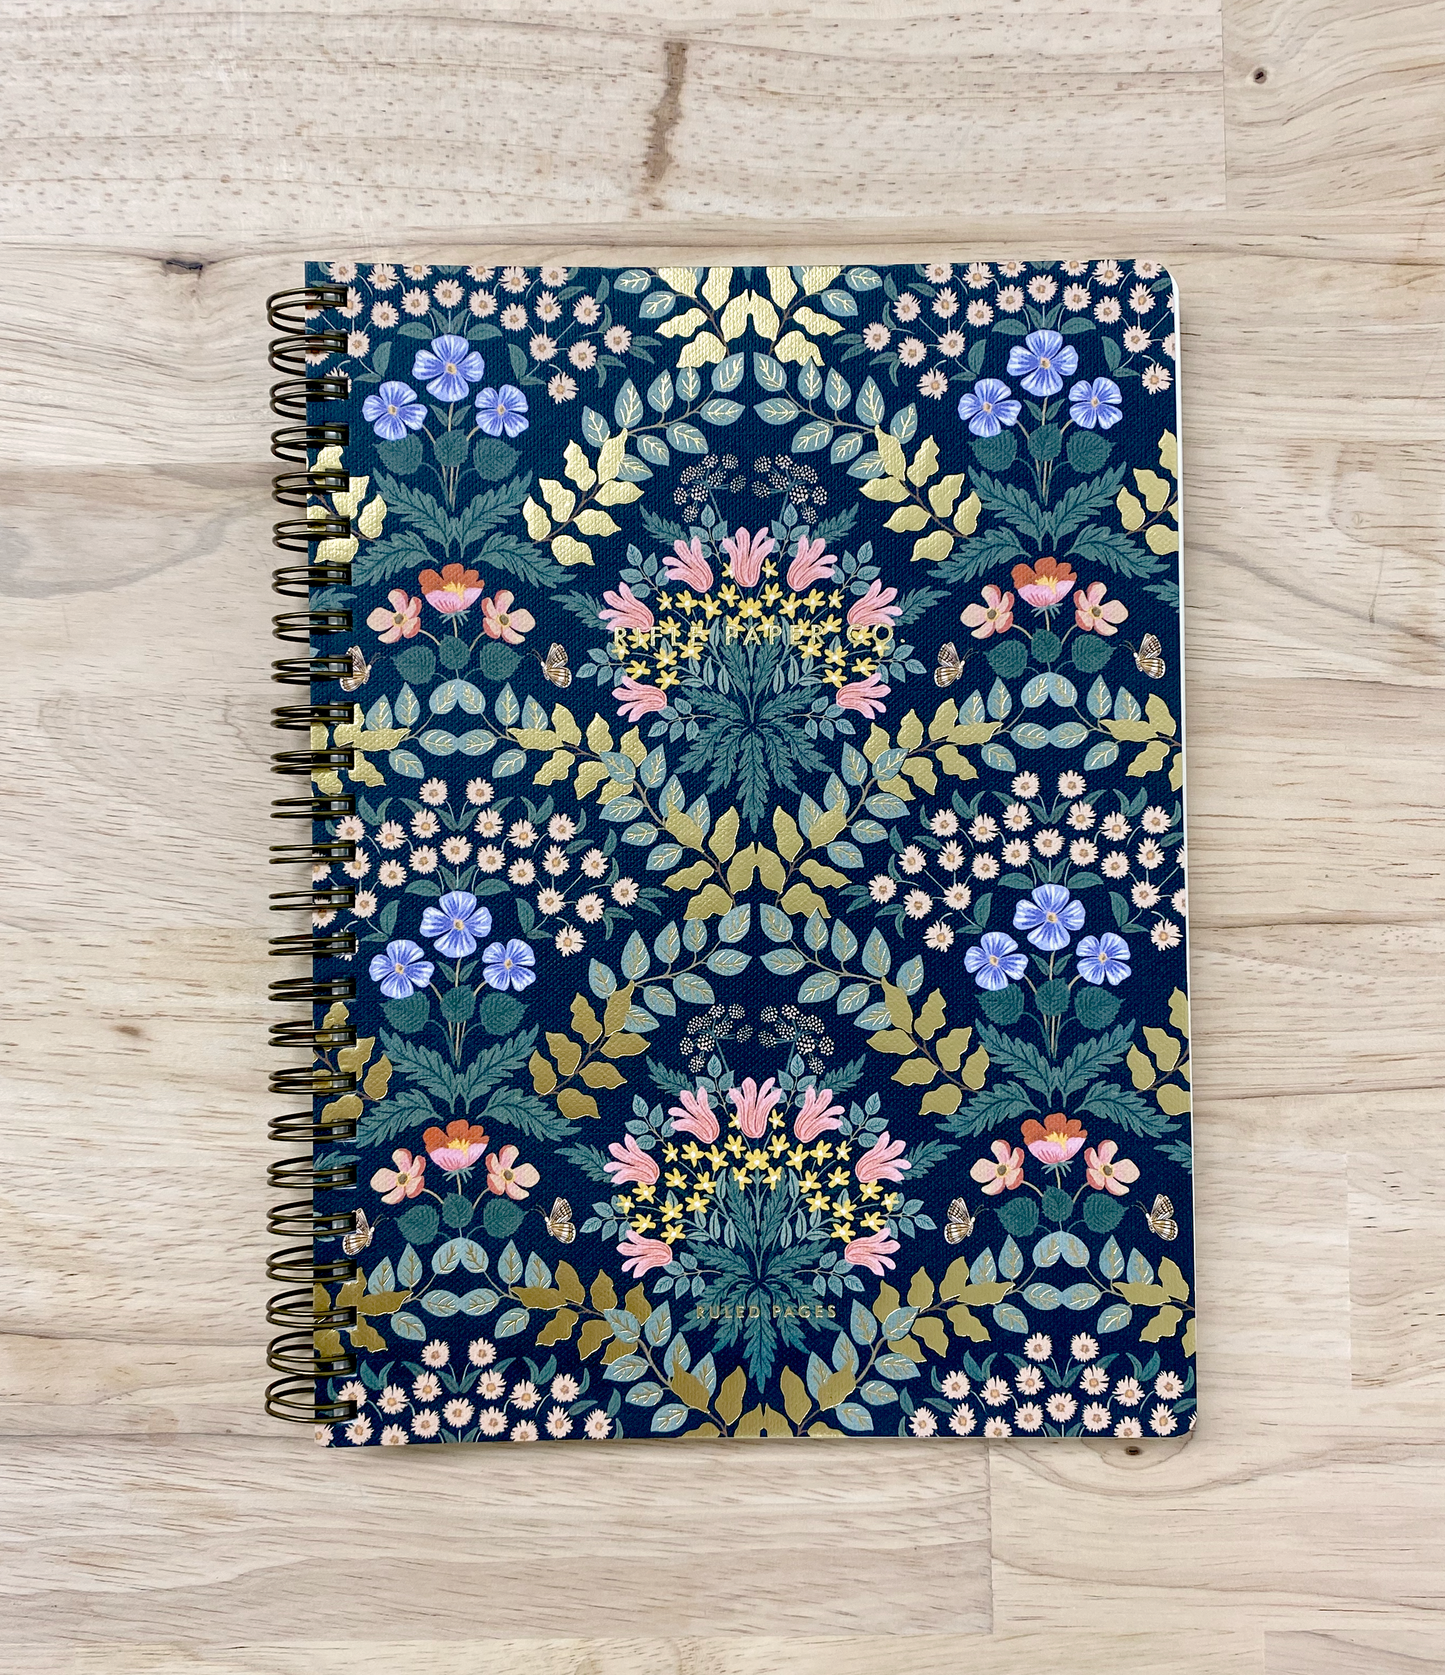 Rifle Paper Co. Spiral Notebook